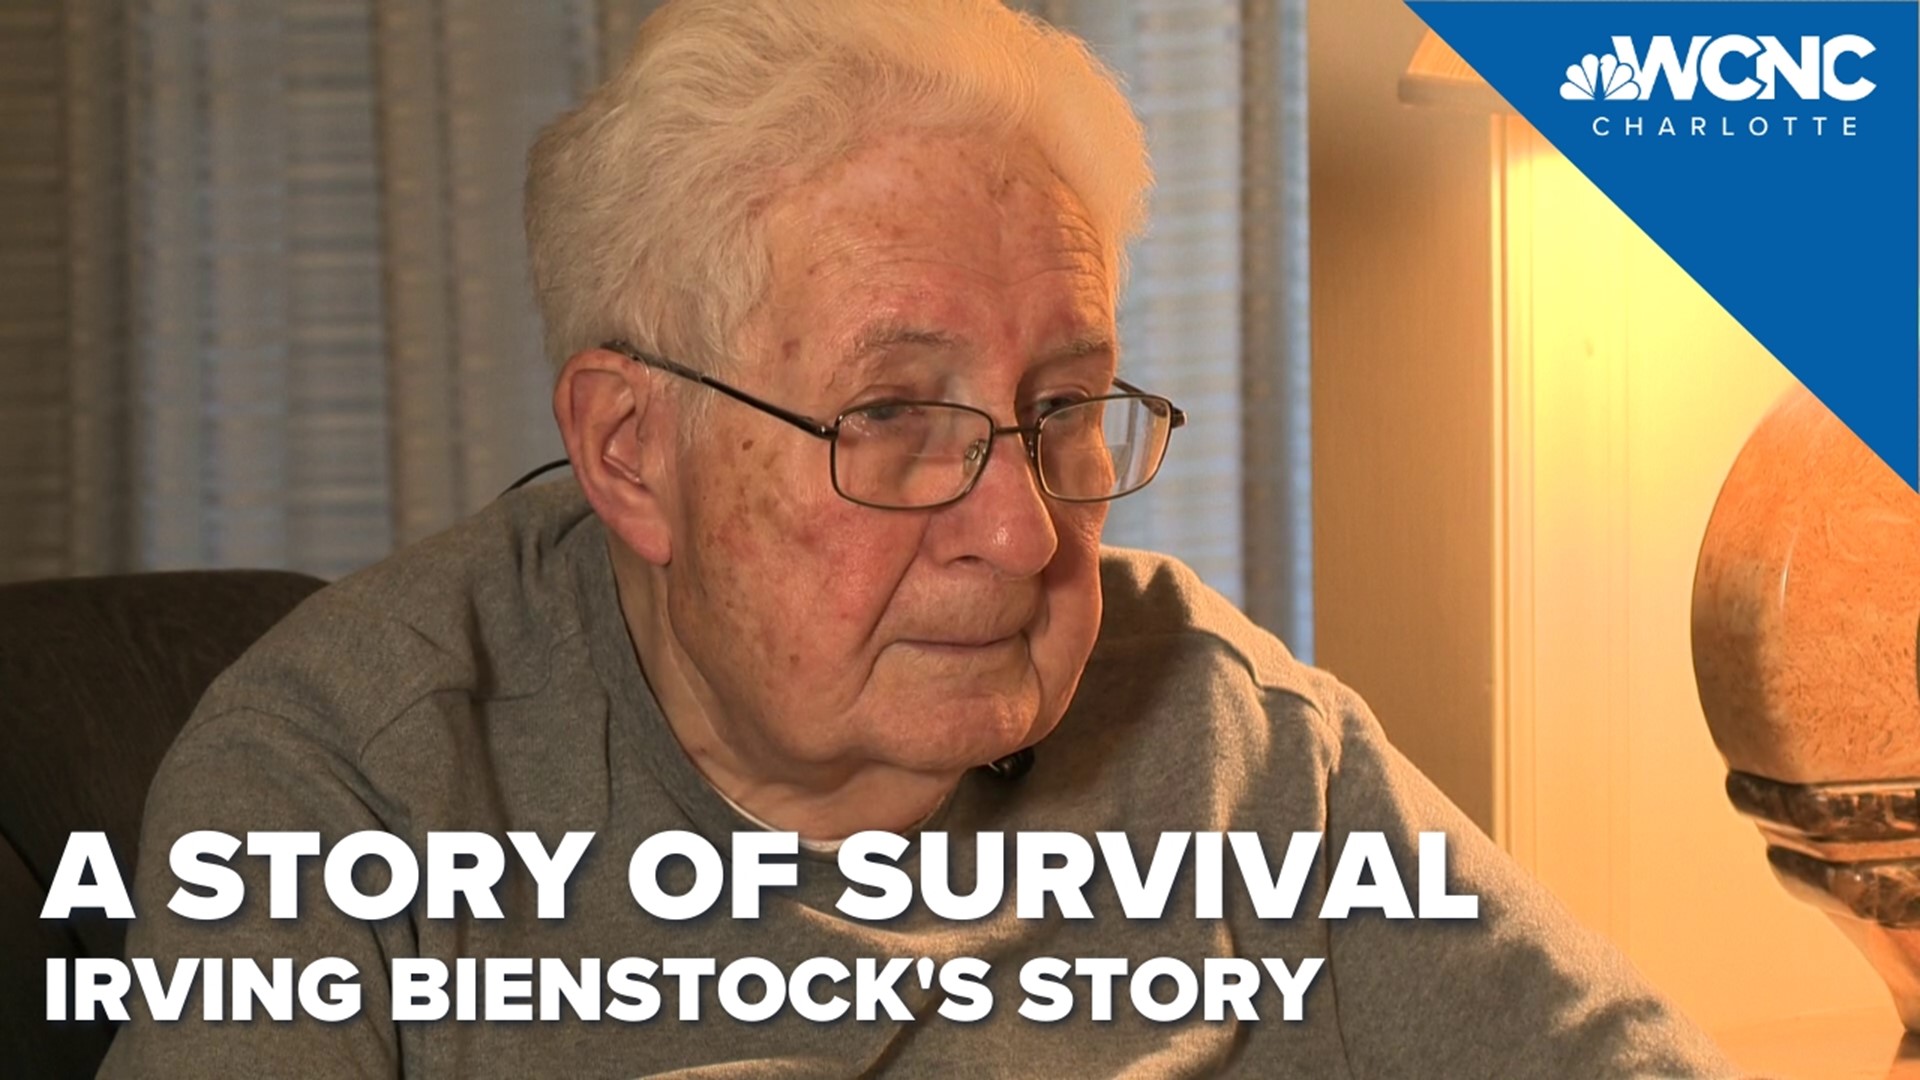 Irving Bienstock lost family members to Auschwitz, even as he was able to escape Nazi Germany. He shares his story with WCNC Charlotte.